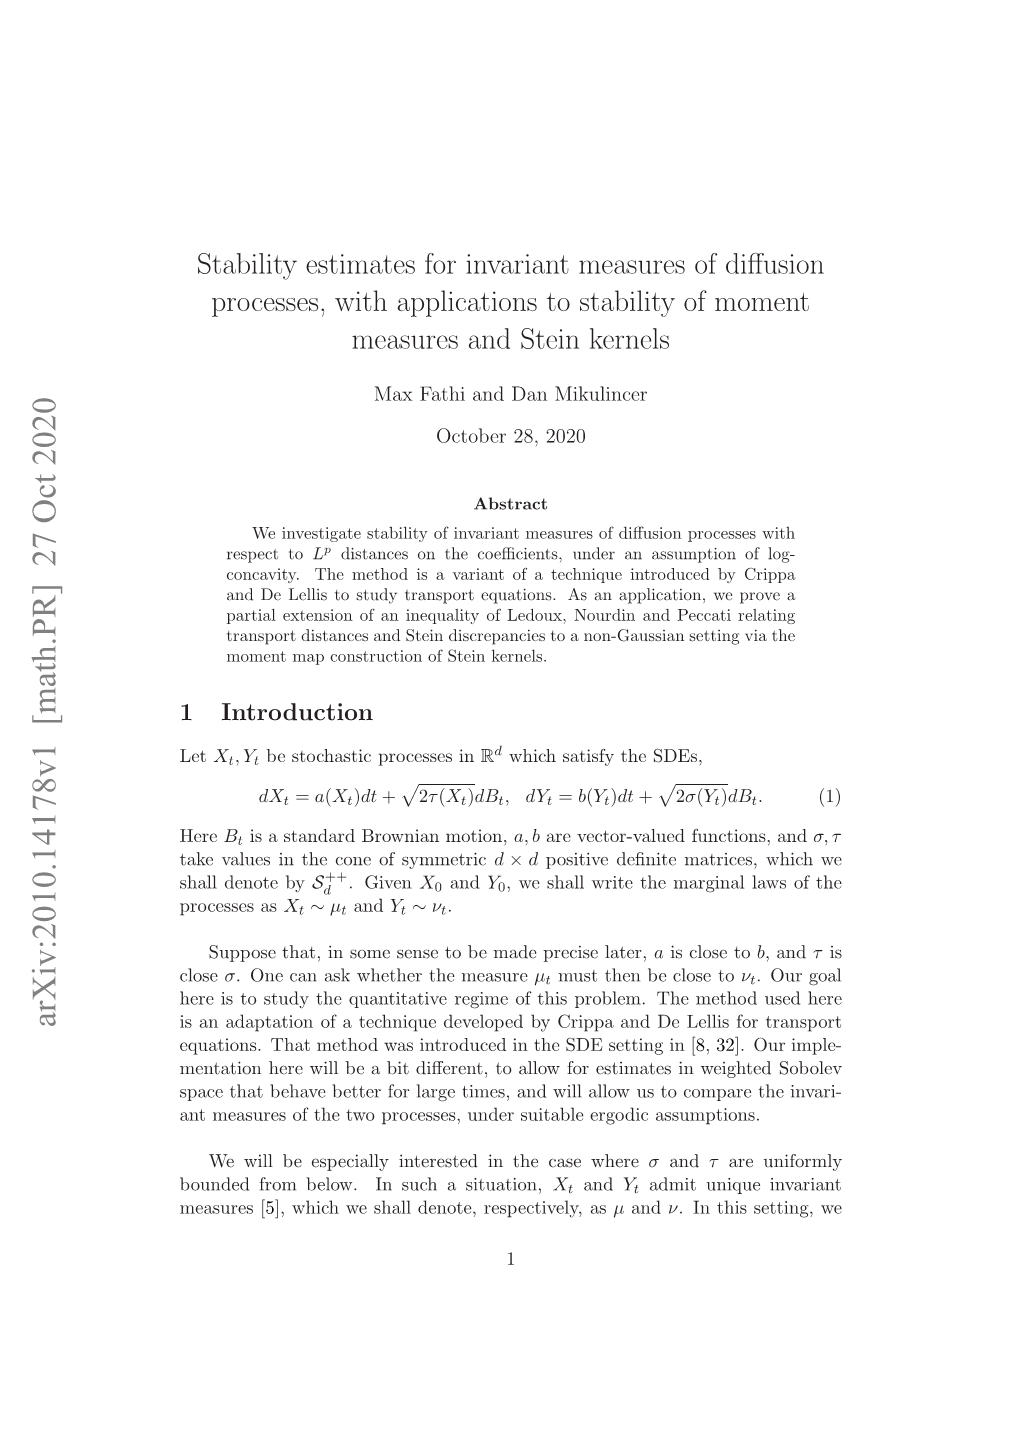 Stability Estimates for Invariant Measures of Diffusion Processes